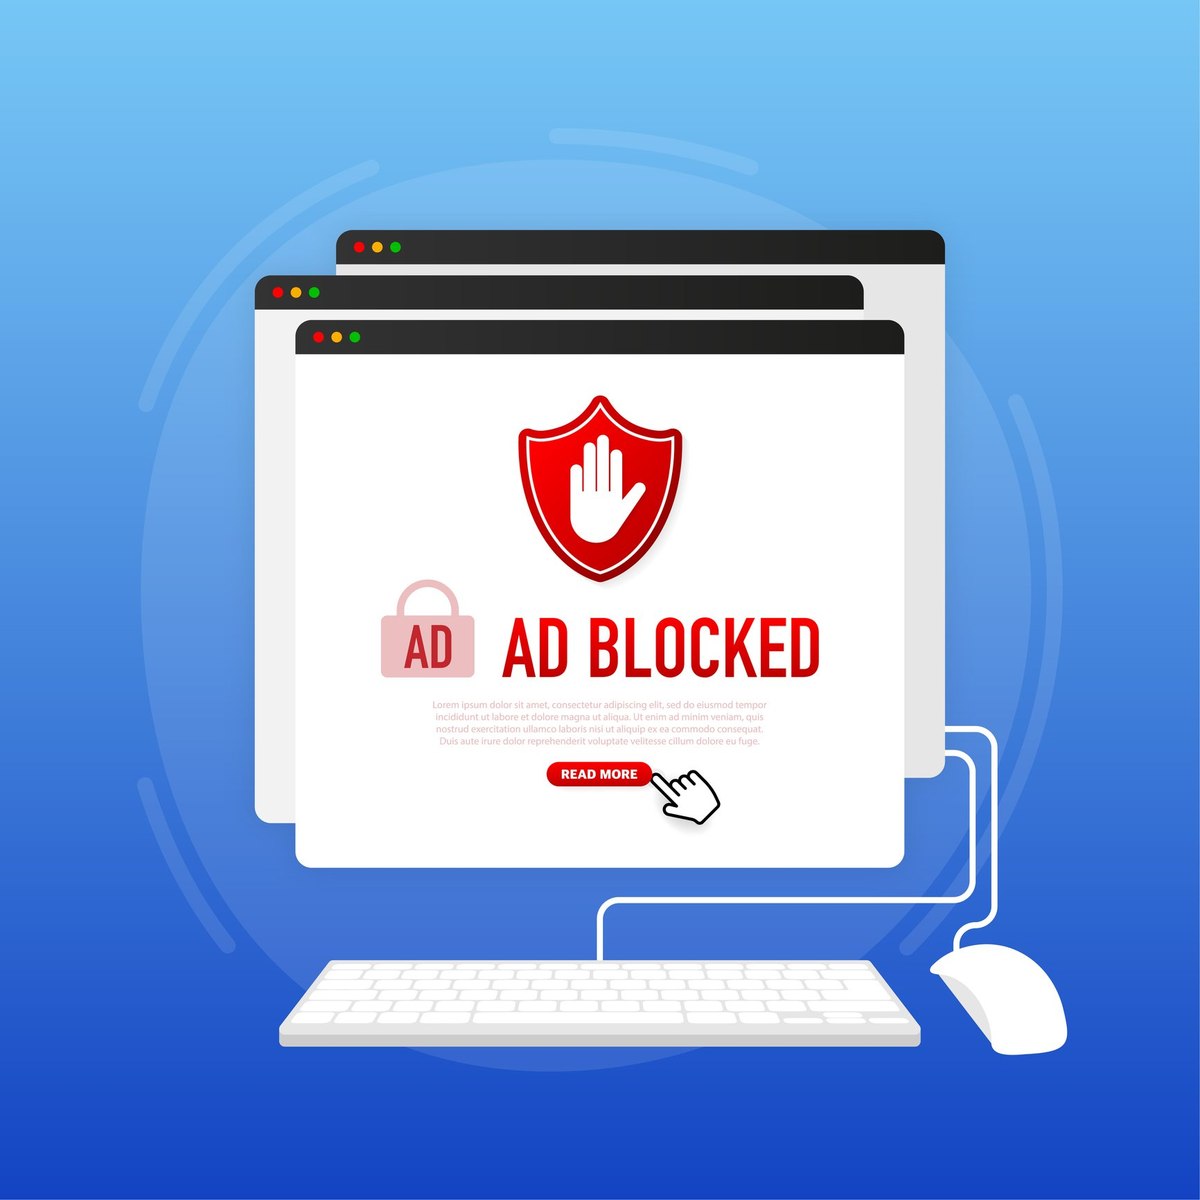 How often do global consumers hit the adblocker button while streaming?